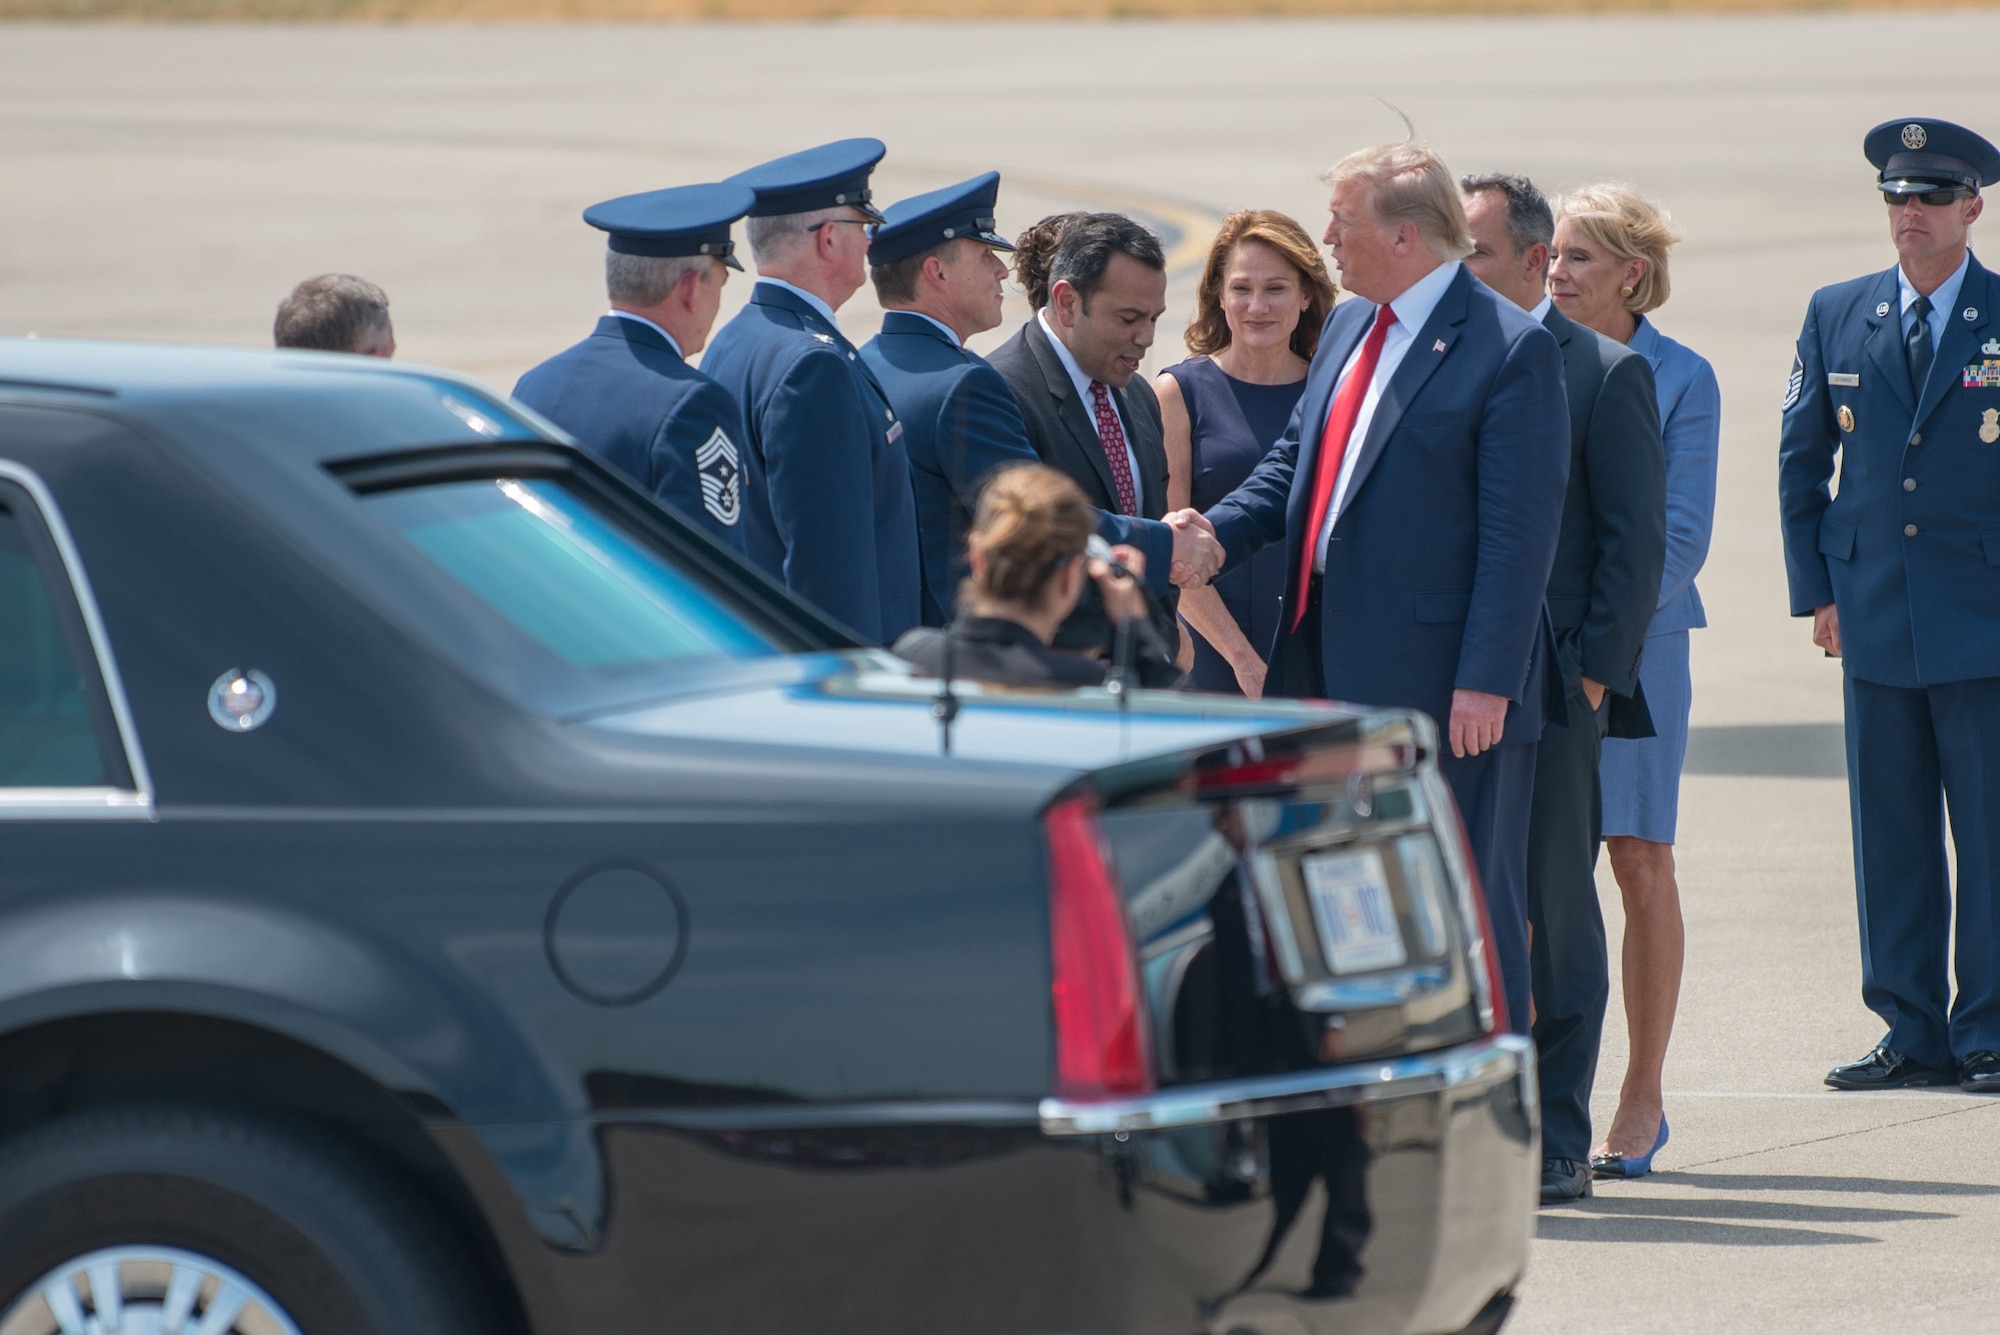 President Donald Trump greets leadership from the Kentucky Air National Guard as he arrives at the 123rd Airlift Wing in Louisville, Ky., Aug. 21, 2019. Trump was in town to speak at an AMVETS convention and attend a fundraiser for Kentucky Gov. Matt Bevin’s re-election campaign. (U.S. Air National Guard photo by Phil Speck)